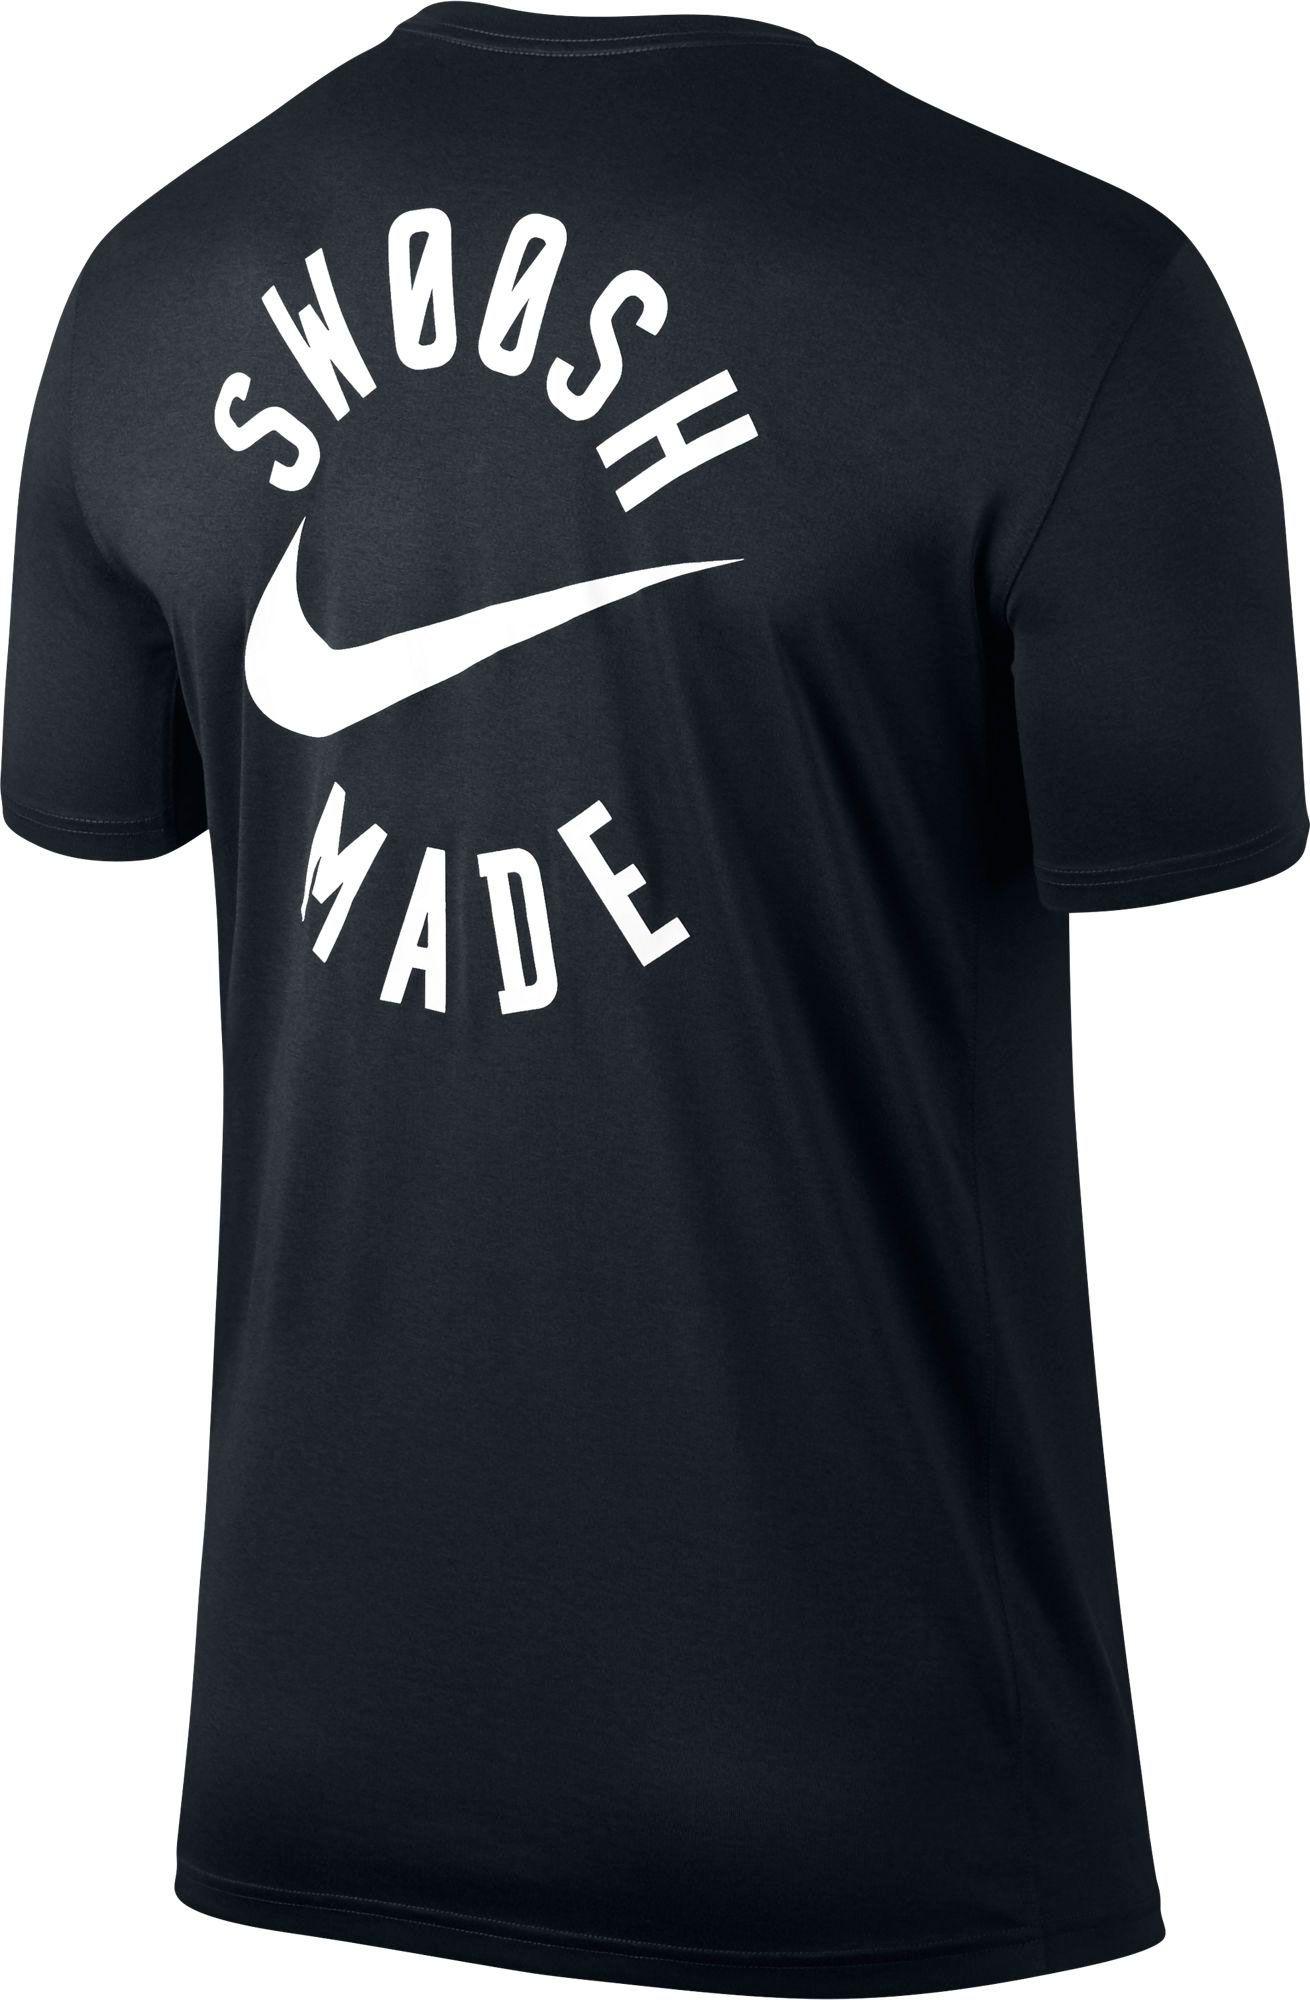 Download Nike Synthetic Swoosh Made Legend Graphic T-shirt in Black ...